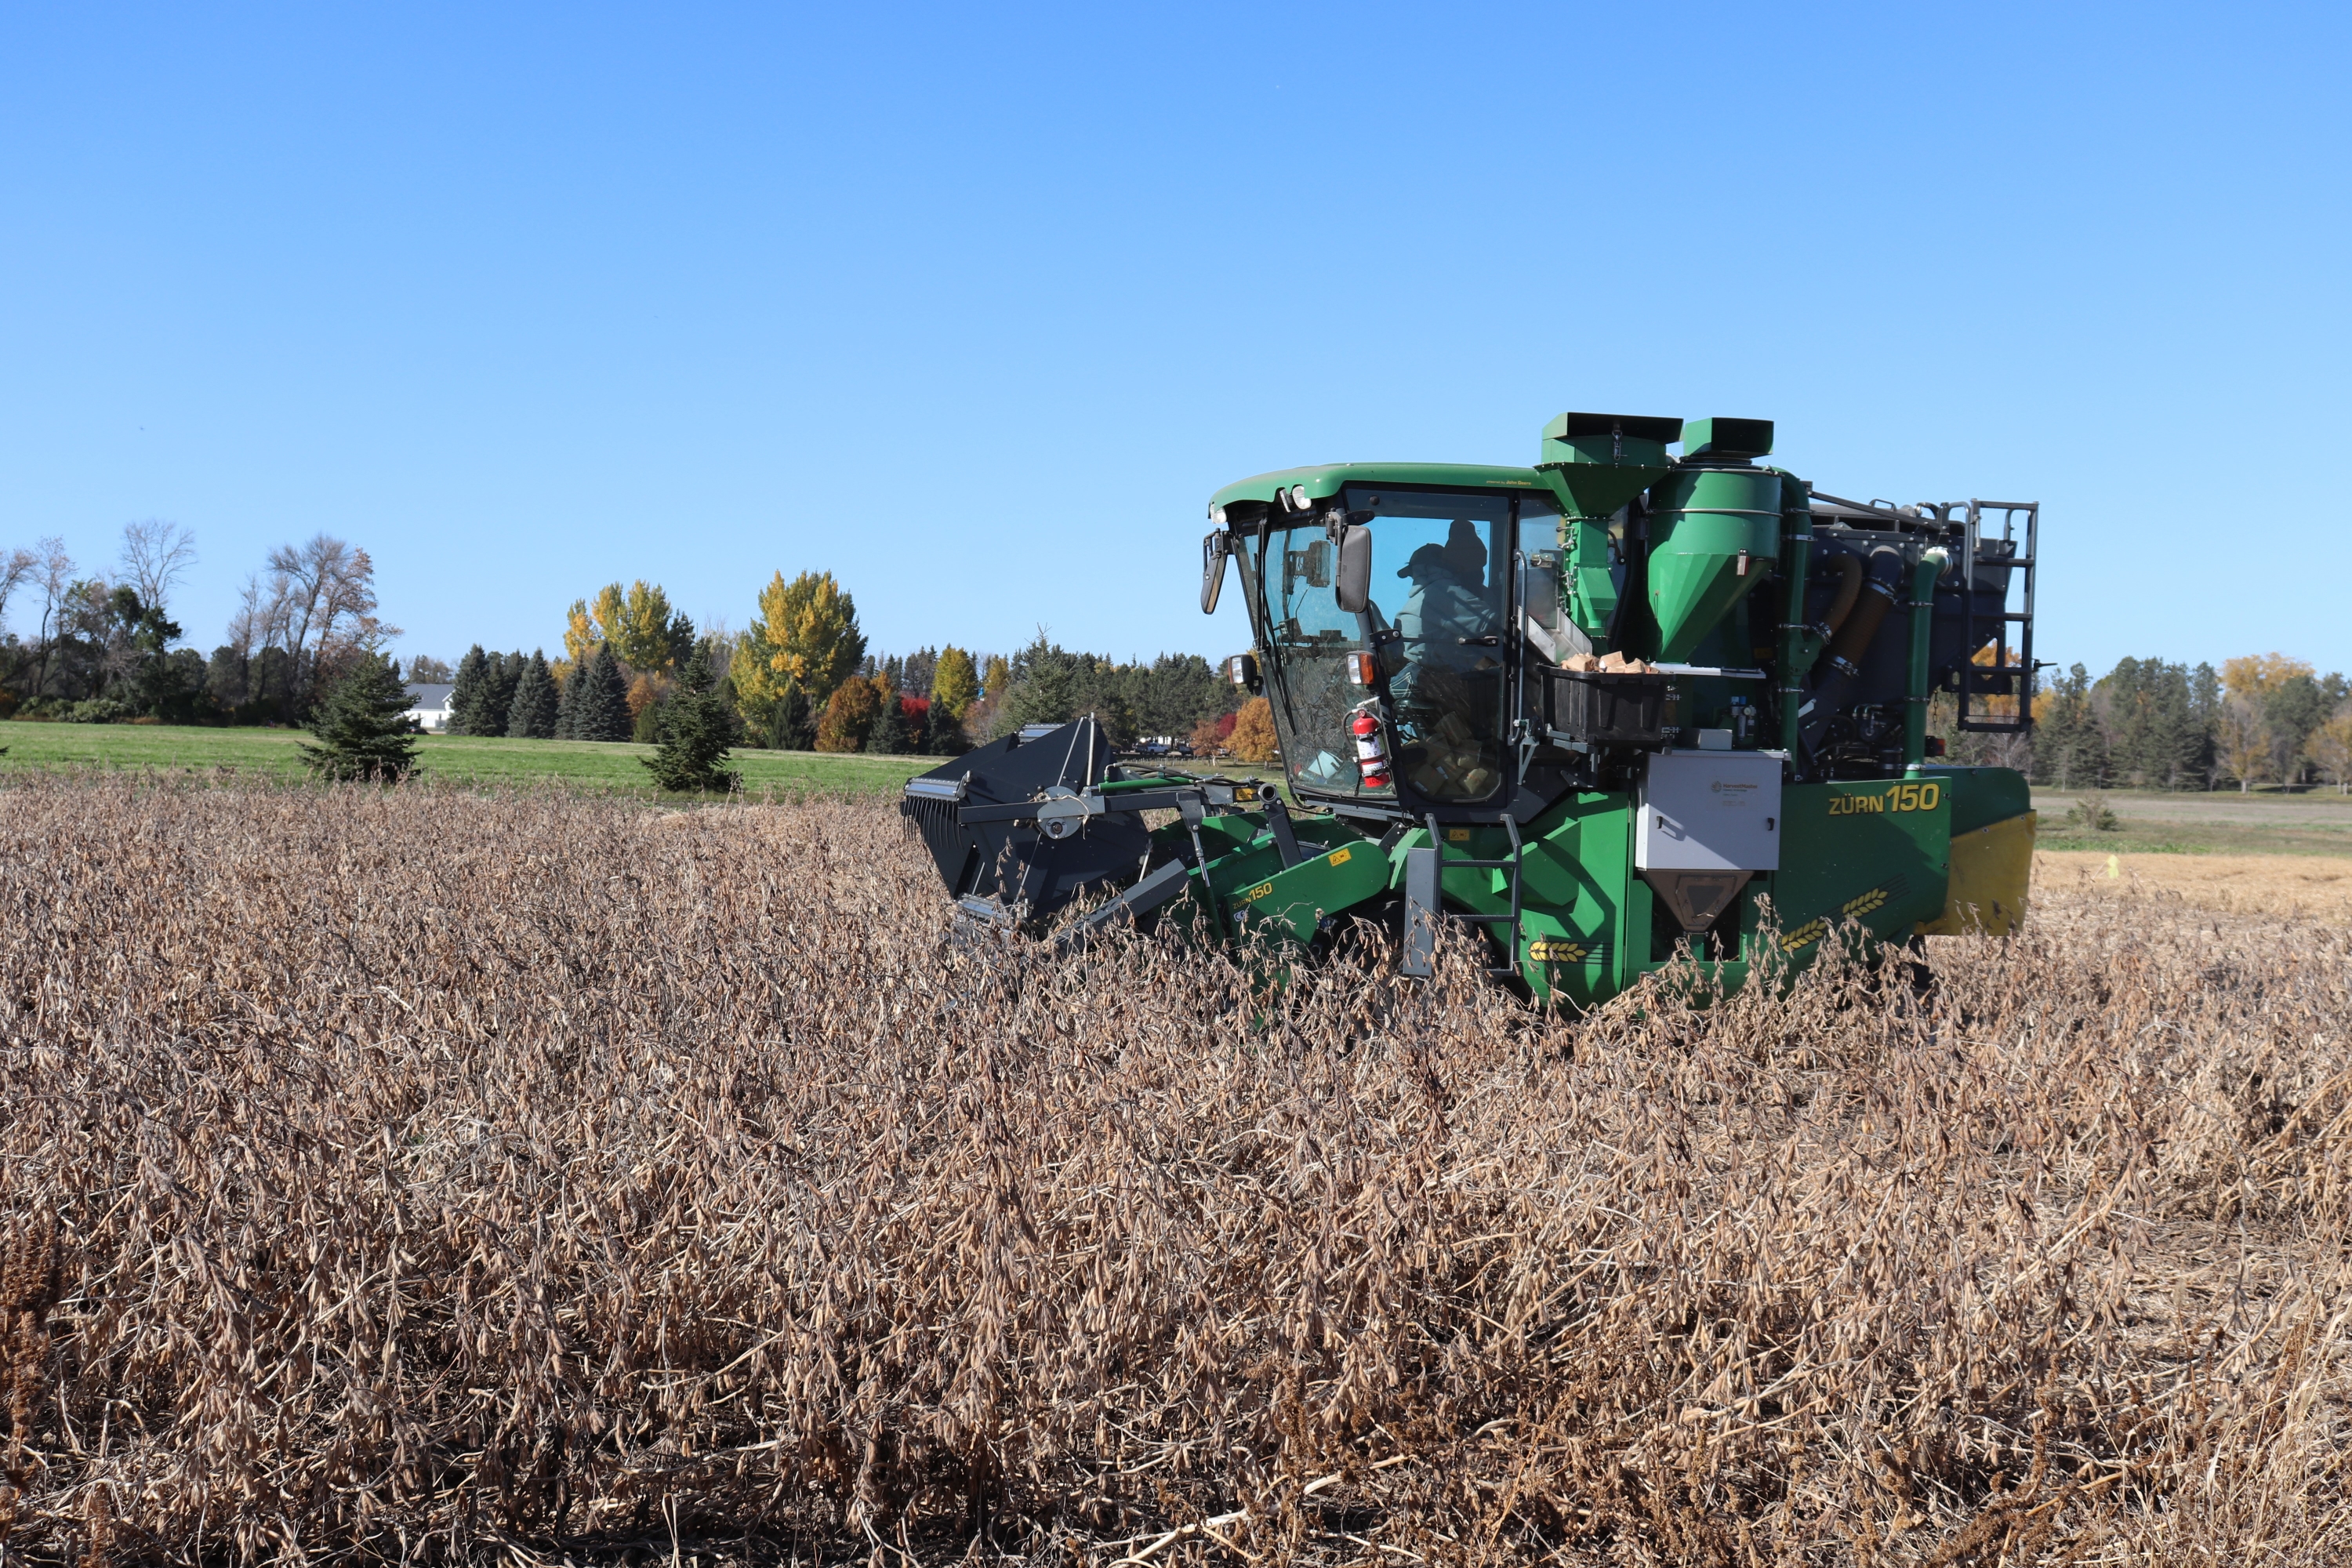 Harvest of soybeans in the peroxide-based products evaluation.